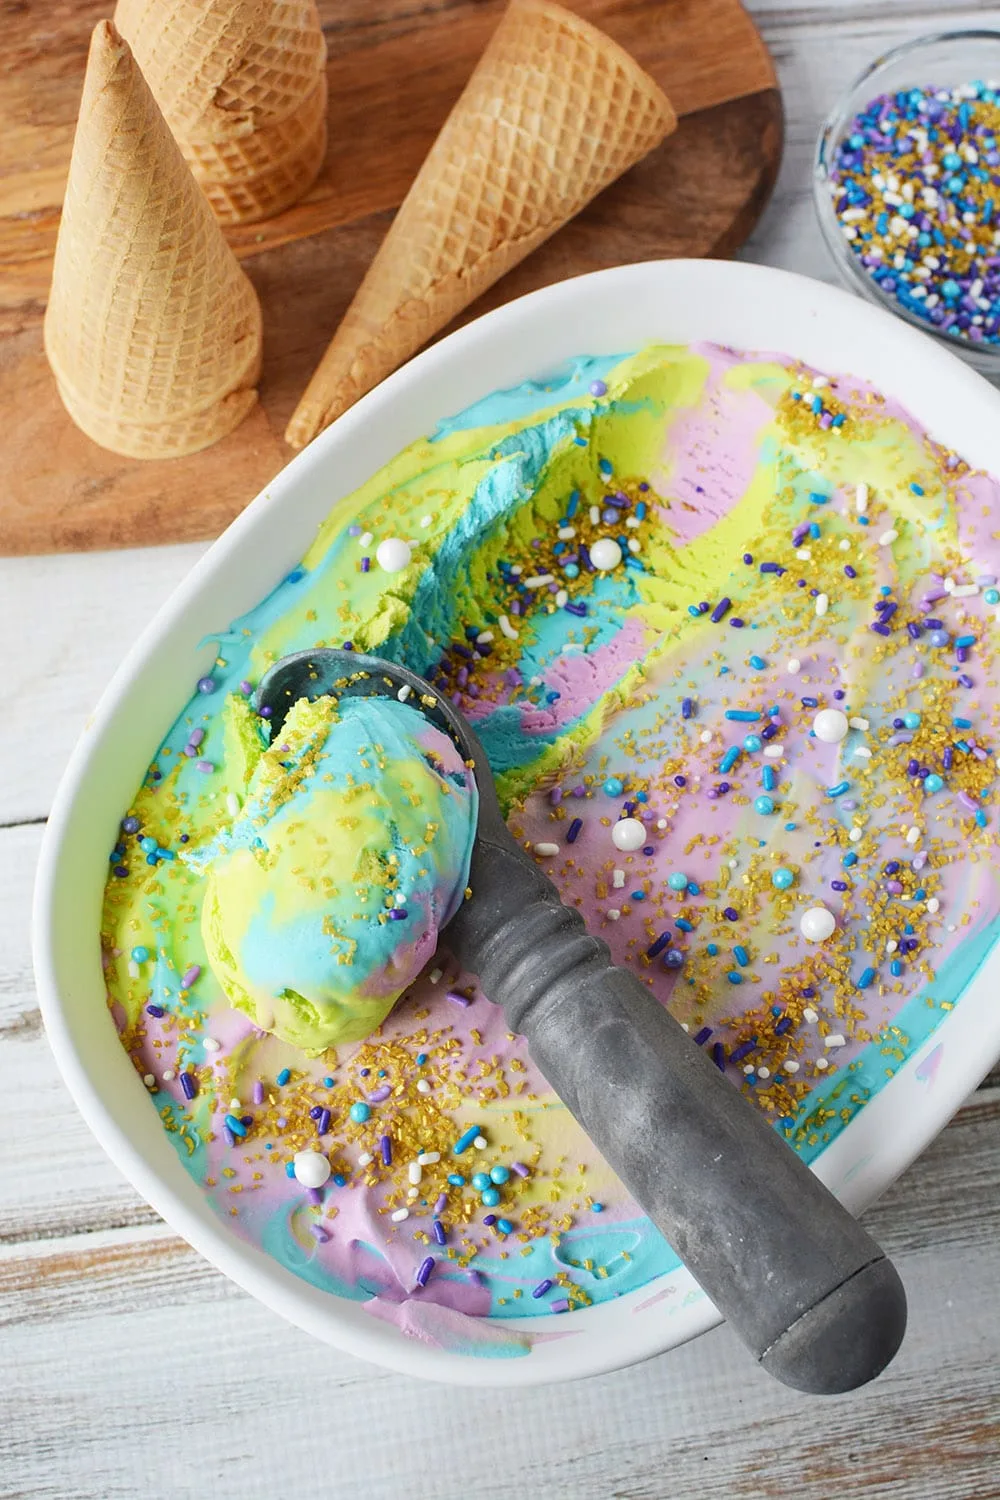 Scooping mermaid ice cream out of the pan.